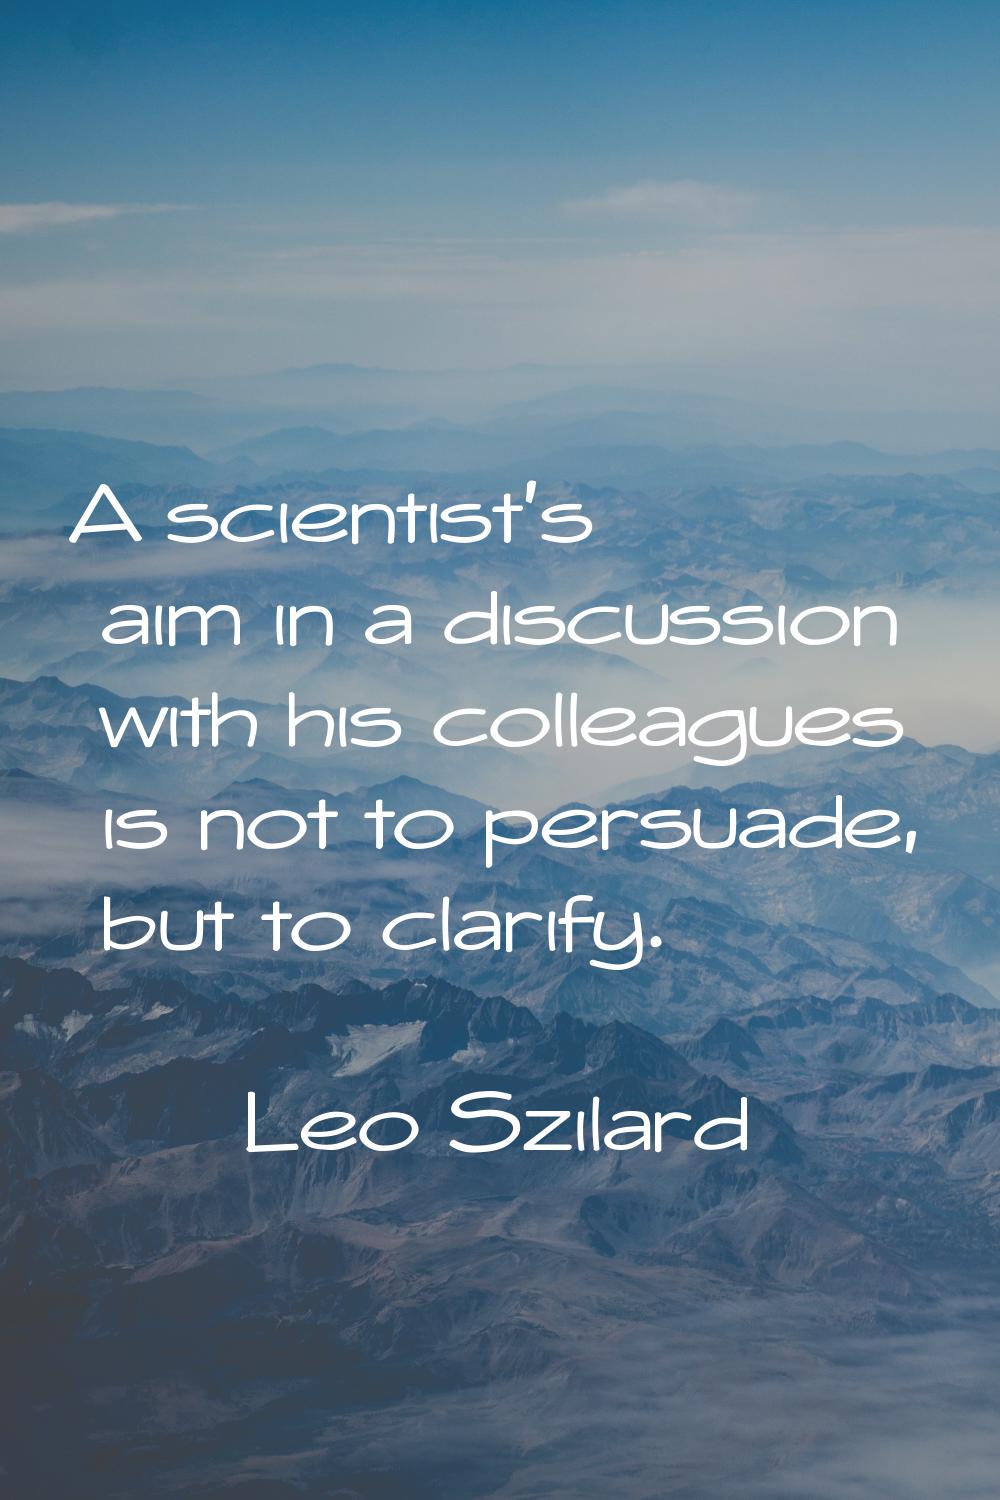 A scientist's aim in a discussion with his colleagues is not to persuade, but to clarify.